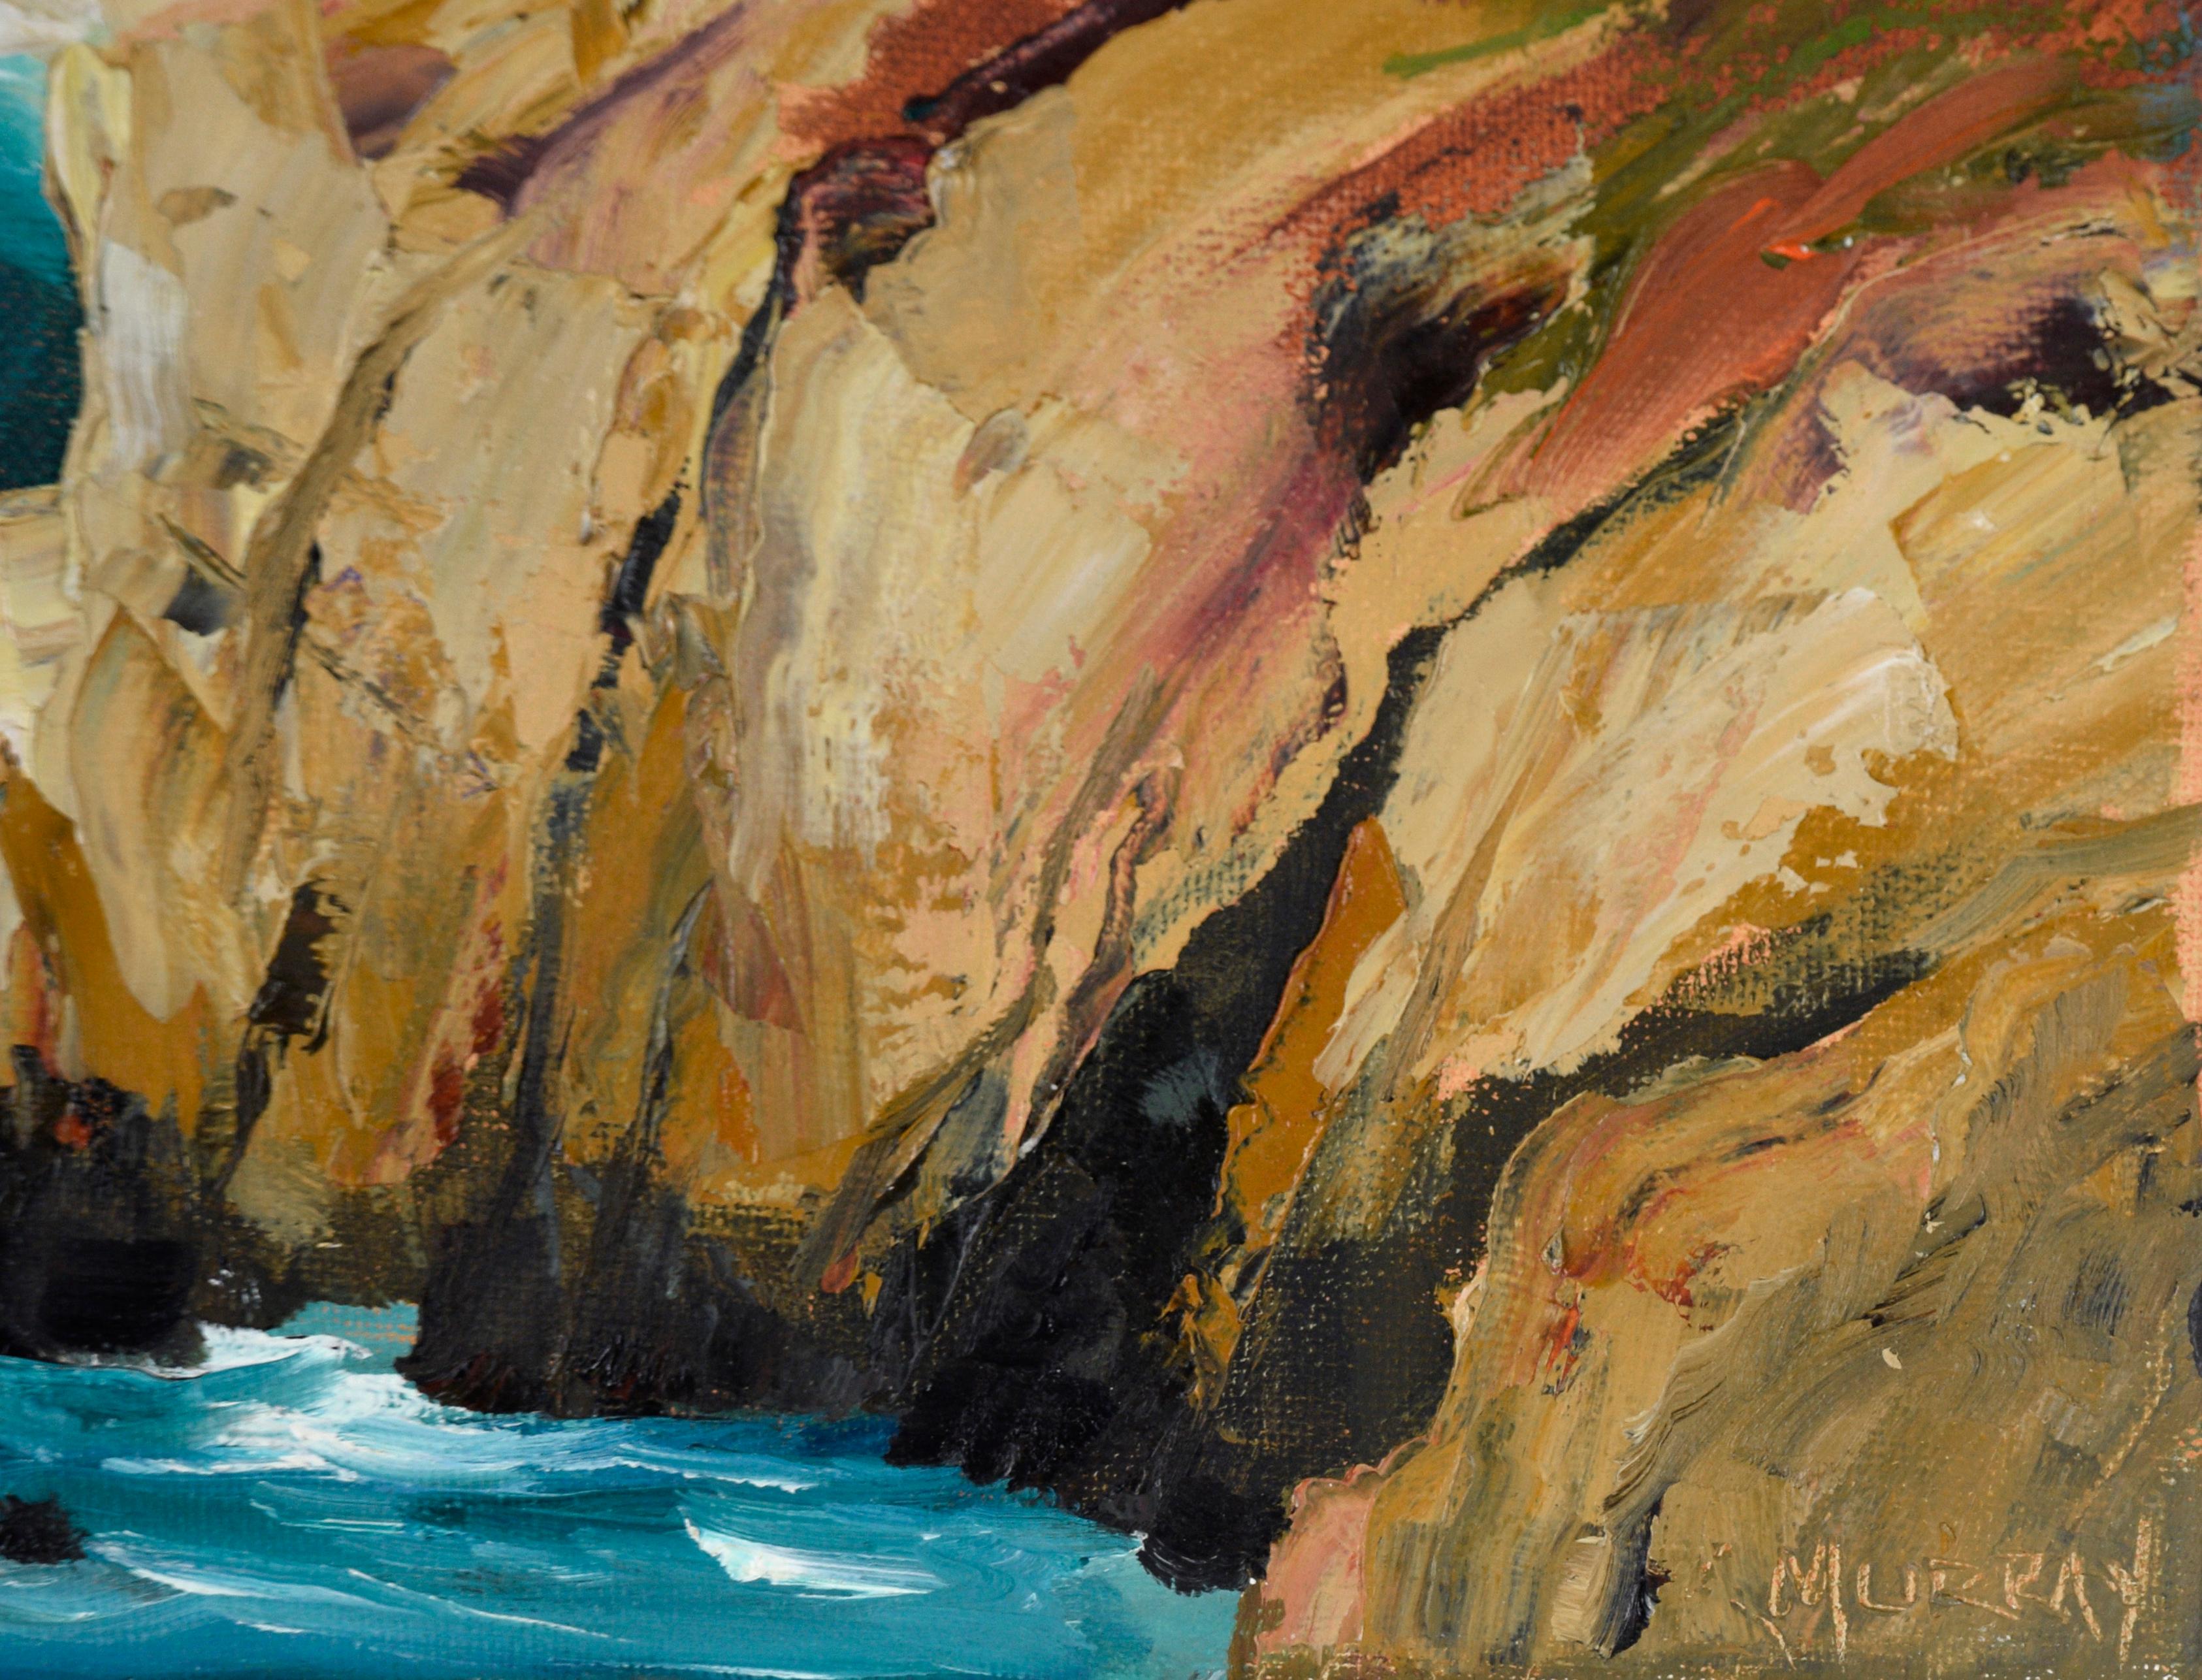 Coastal Cliffs and Lush Valley - Pacific Coast Big Sur Seascape in Oil on Canvas

Gorgeous seascape of Hurricane Point, Big Sur coast by California artist Kathleen Murray (American, b. 1958). The brilliant blue Pacific crashes up against steep